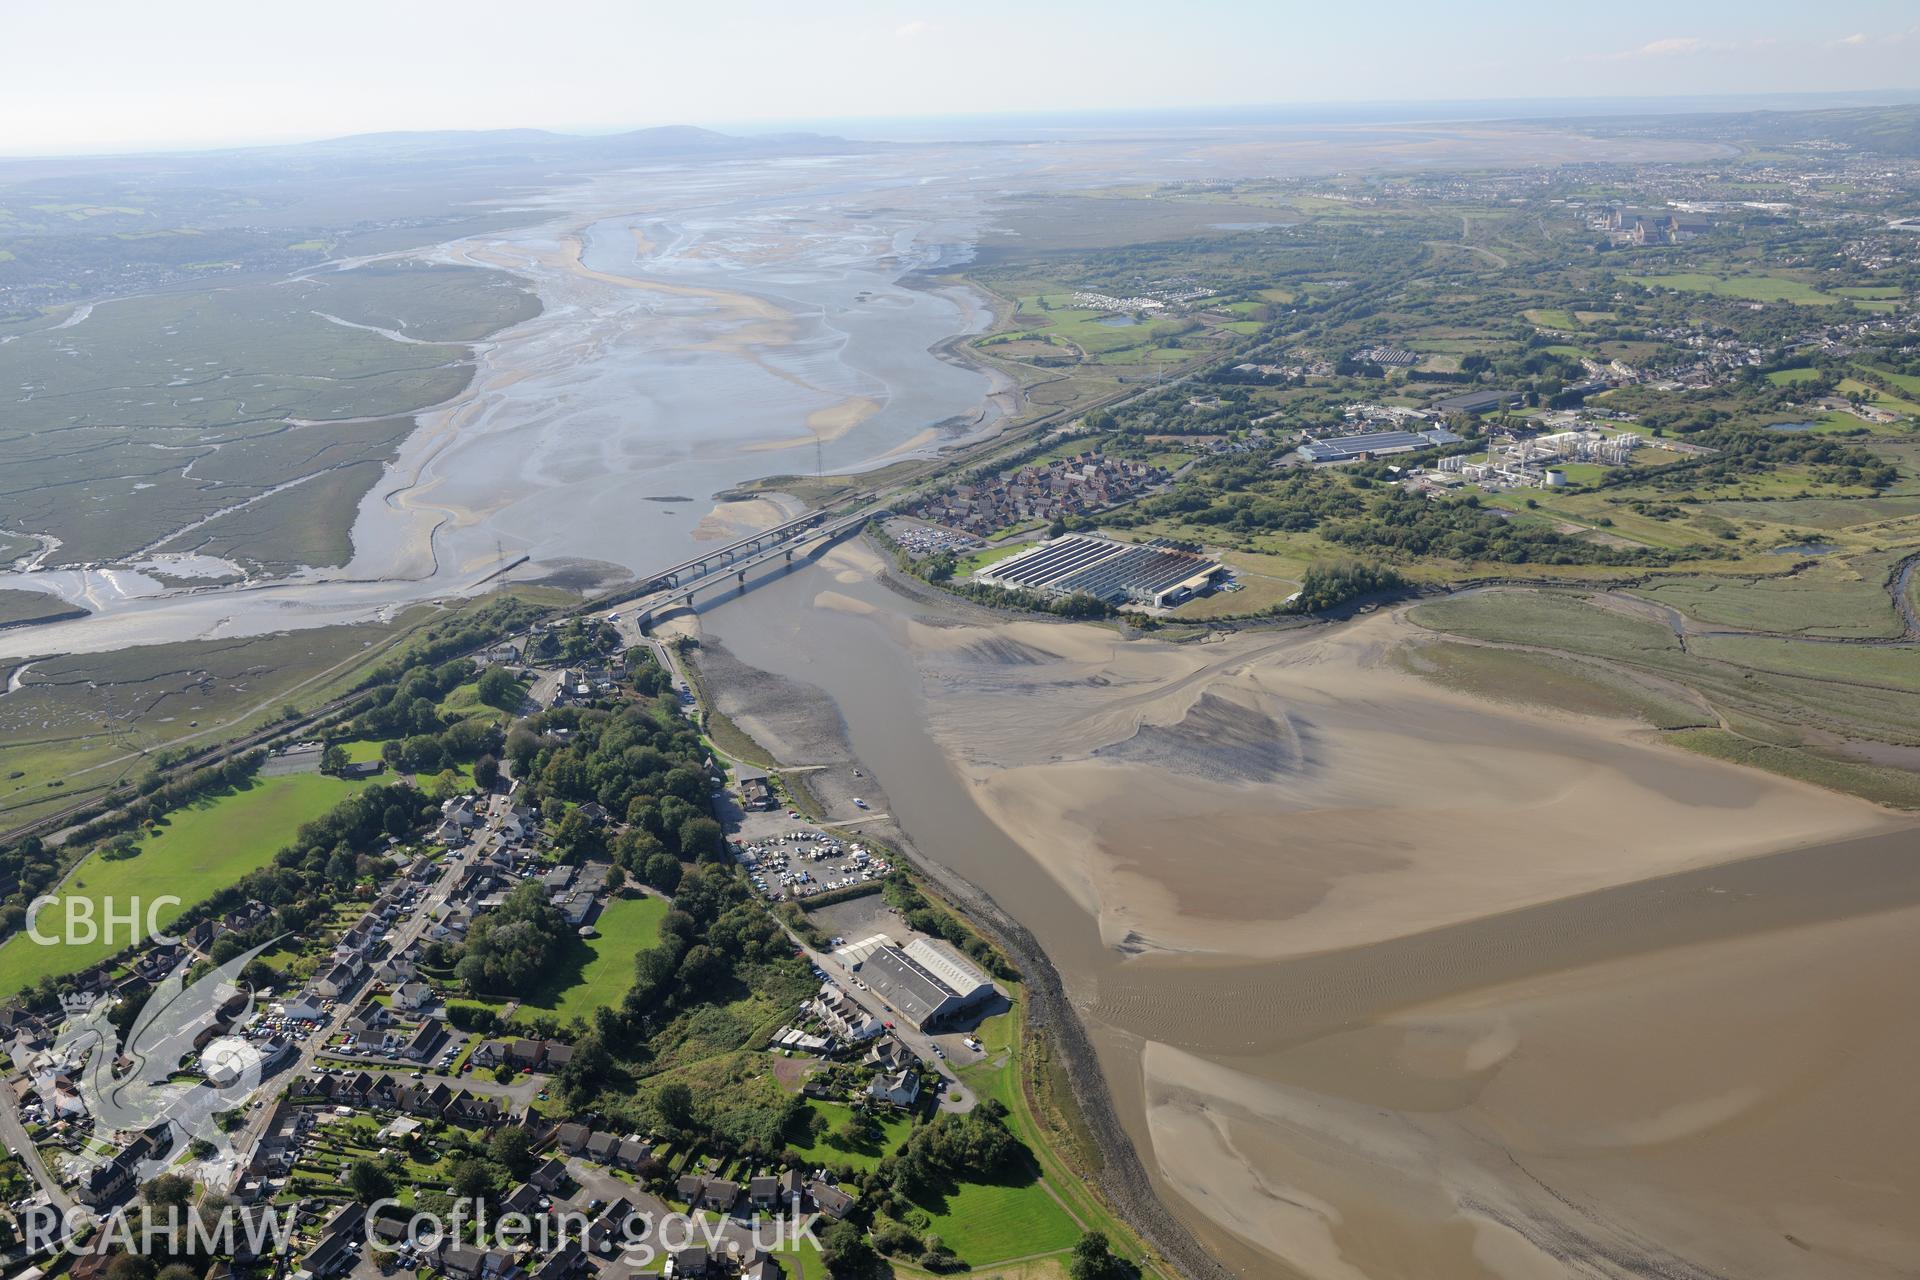 The town of Loughor, between Llanelli and Swansea. View includes Yspytty tin plate works, Loughor road bridge and Loughor railway viaduct. Oblique aerial photograph taken during the Royal Commission's programme of archaeological aerial reconnaissance by Toby Driver on 30th September 2015.